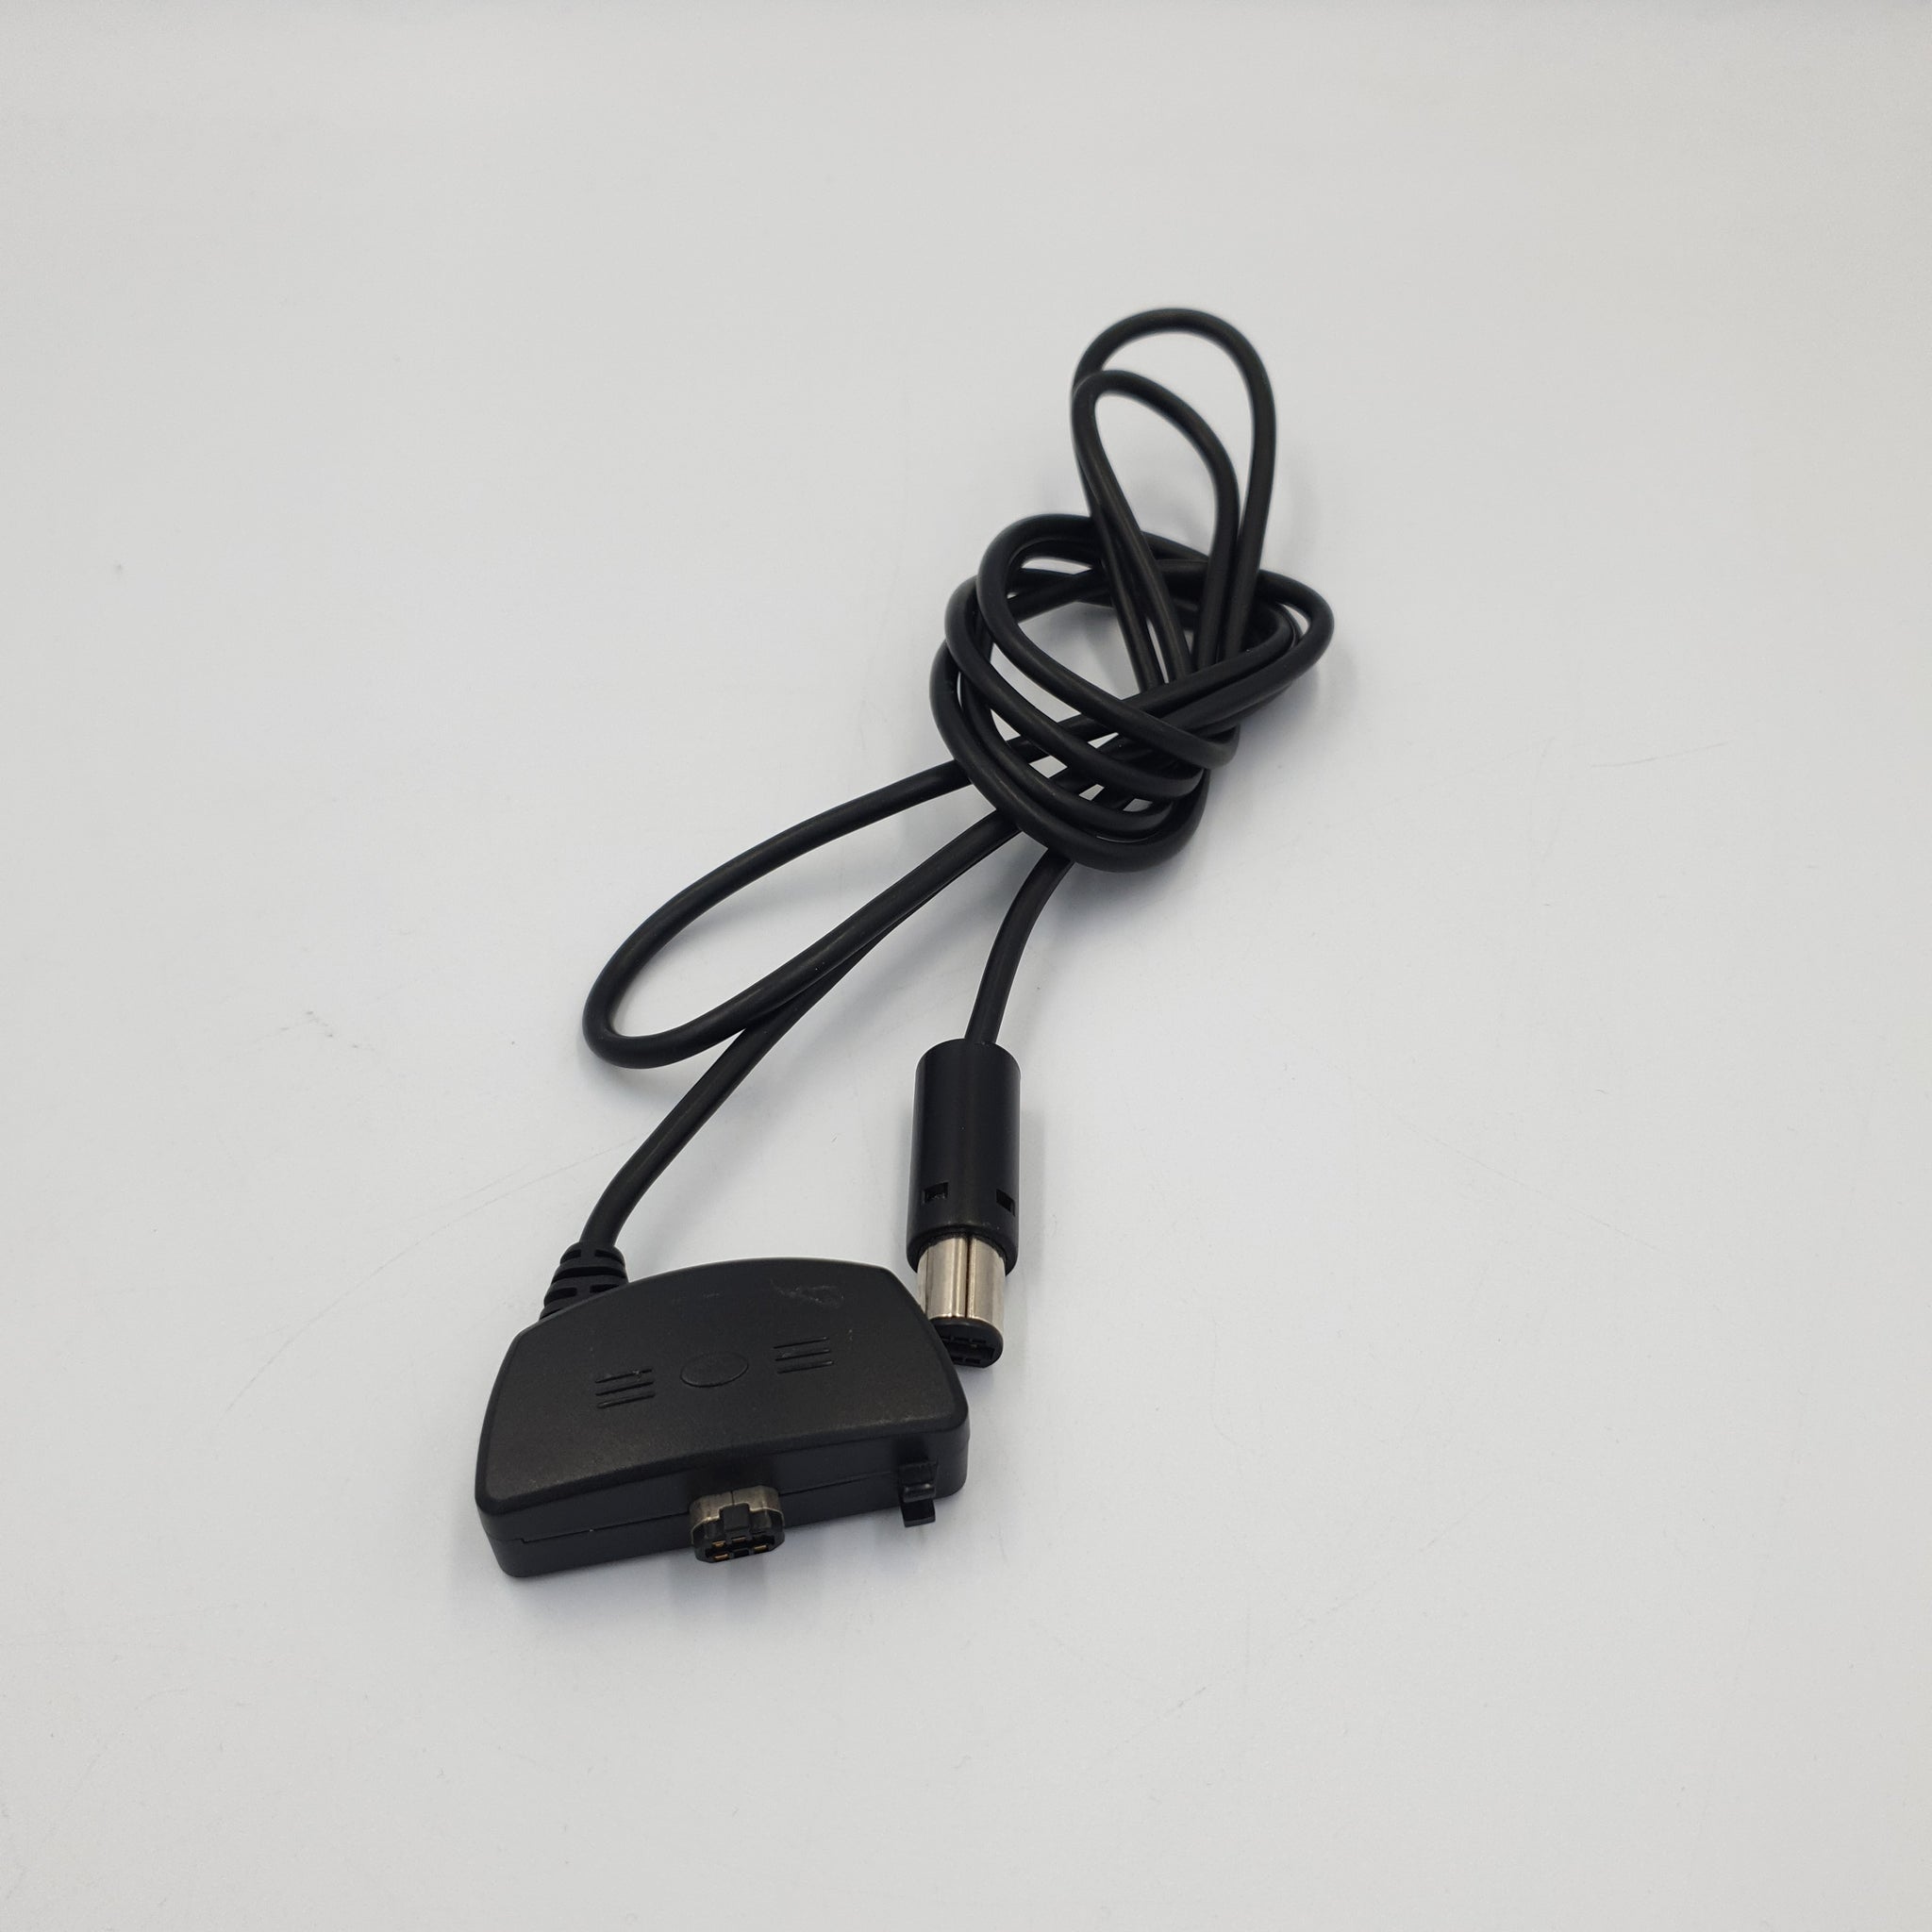 GAMECUBE 3RD PARTY LINK CABLE